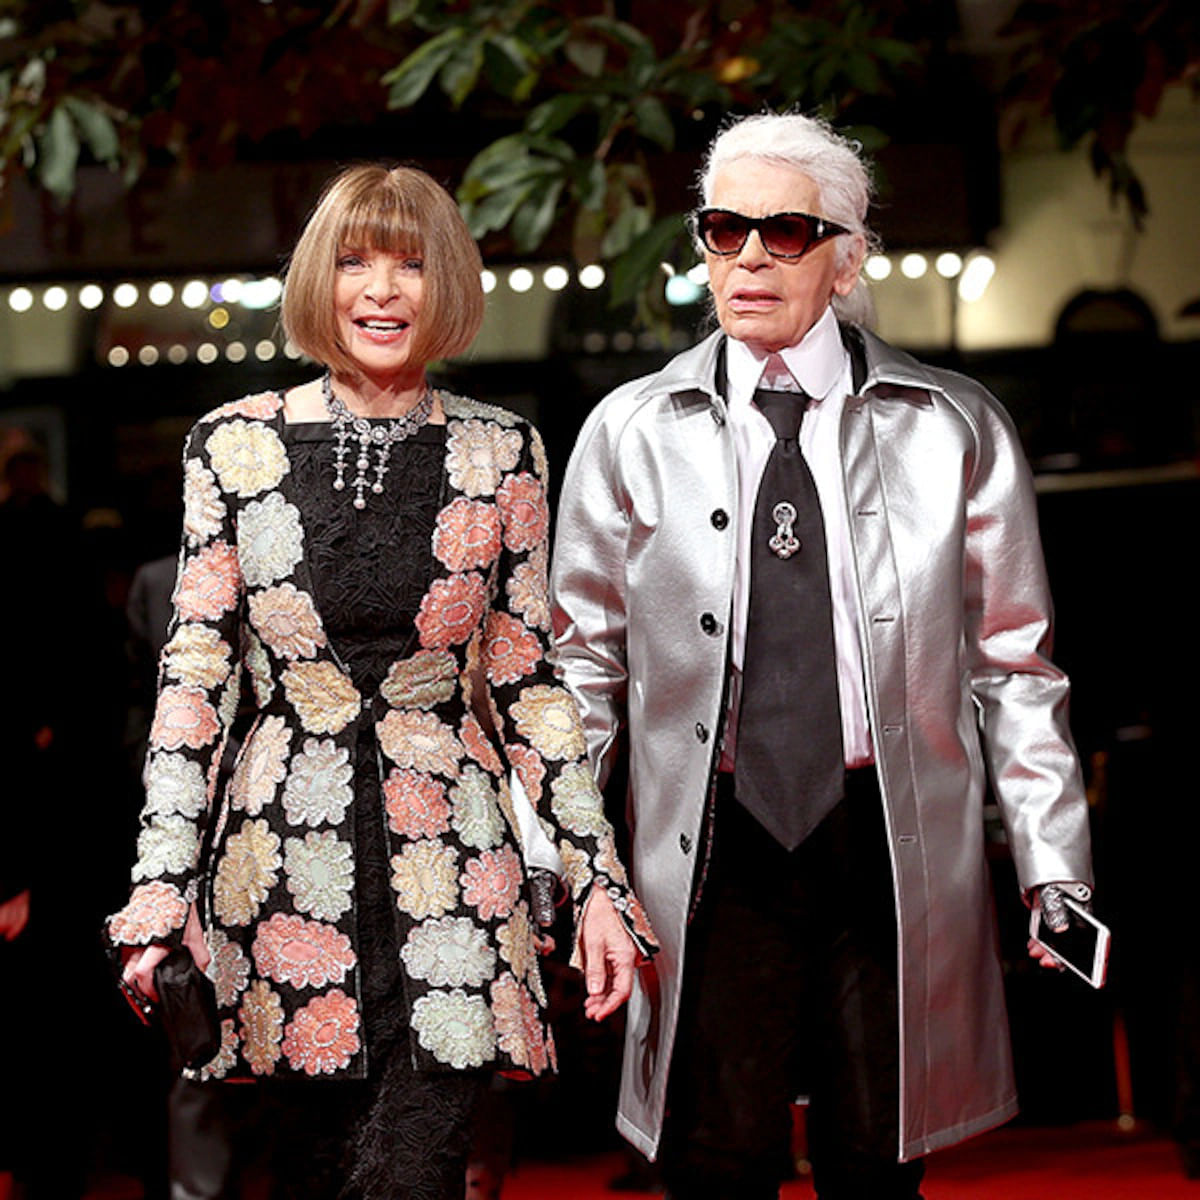 Here's why celebrating Karl Lagerfeld's legacy needs to be questioned. 